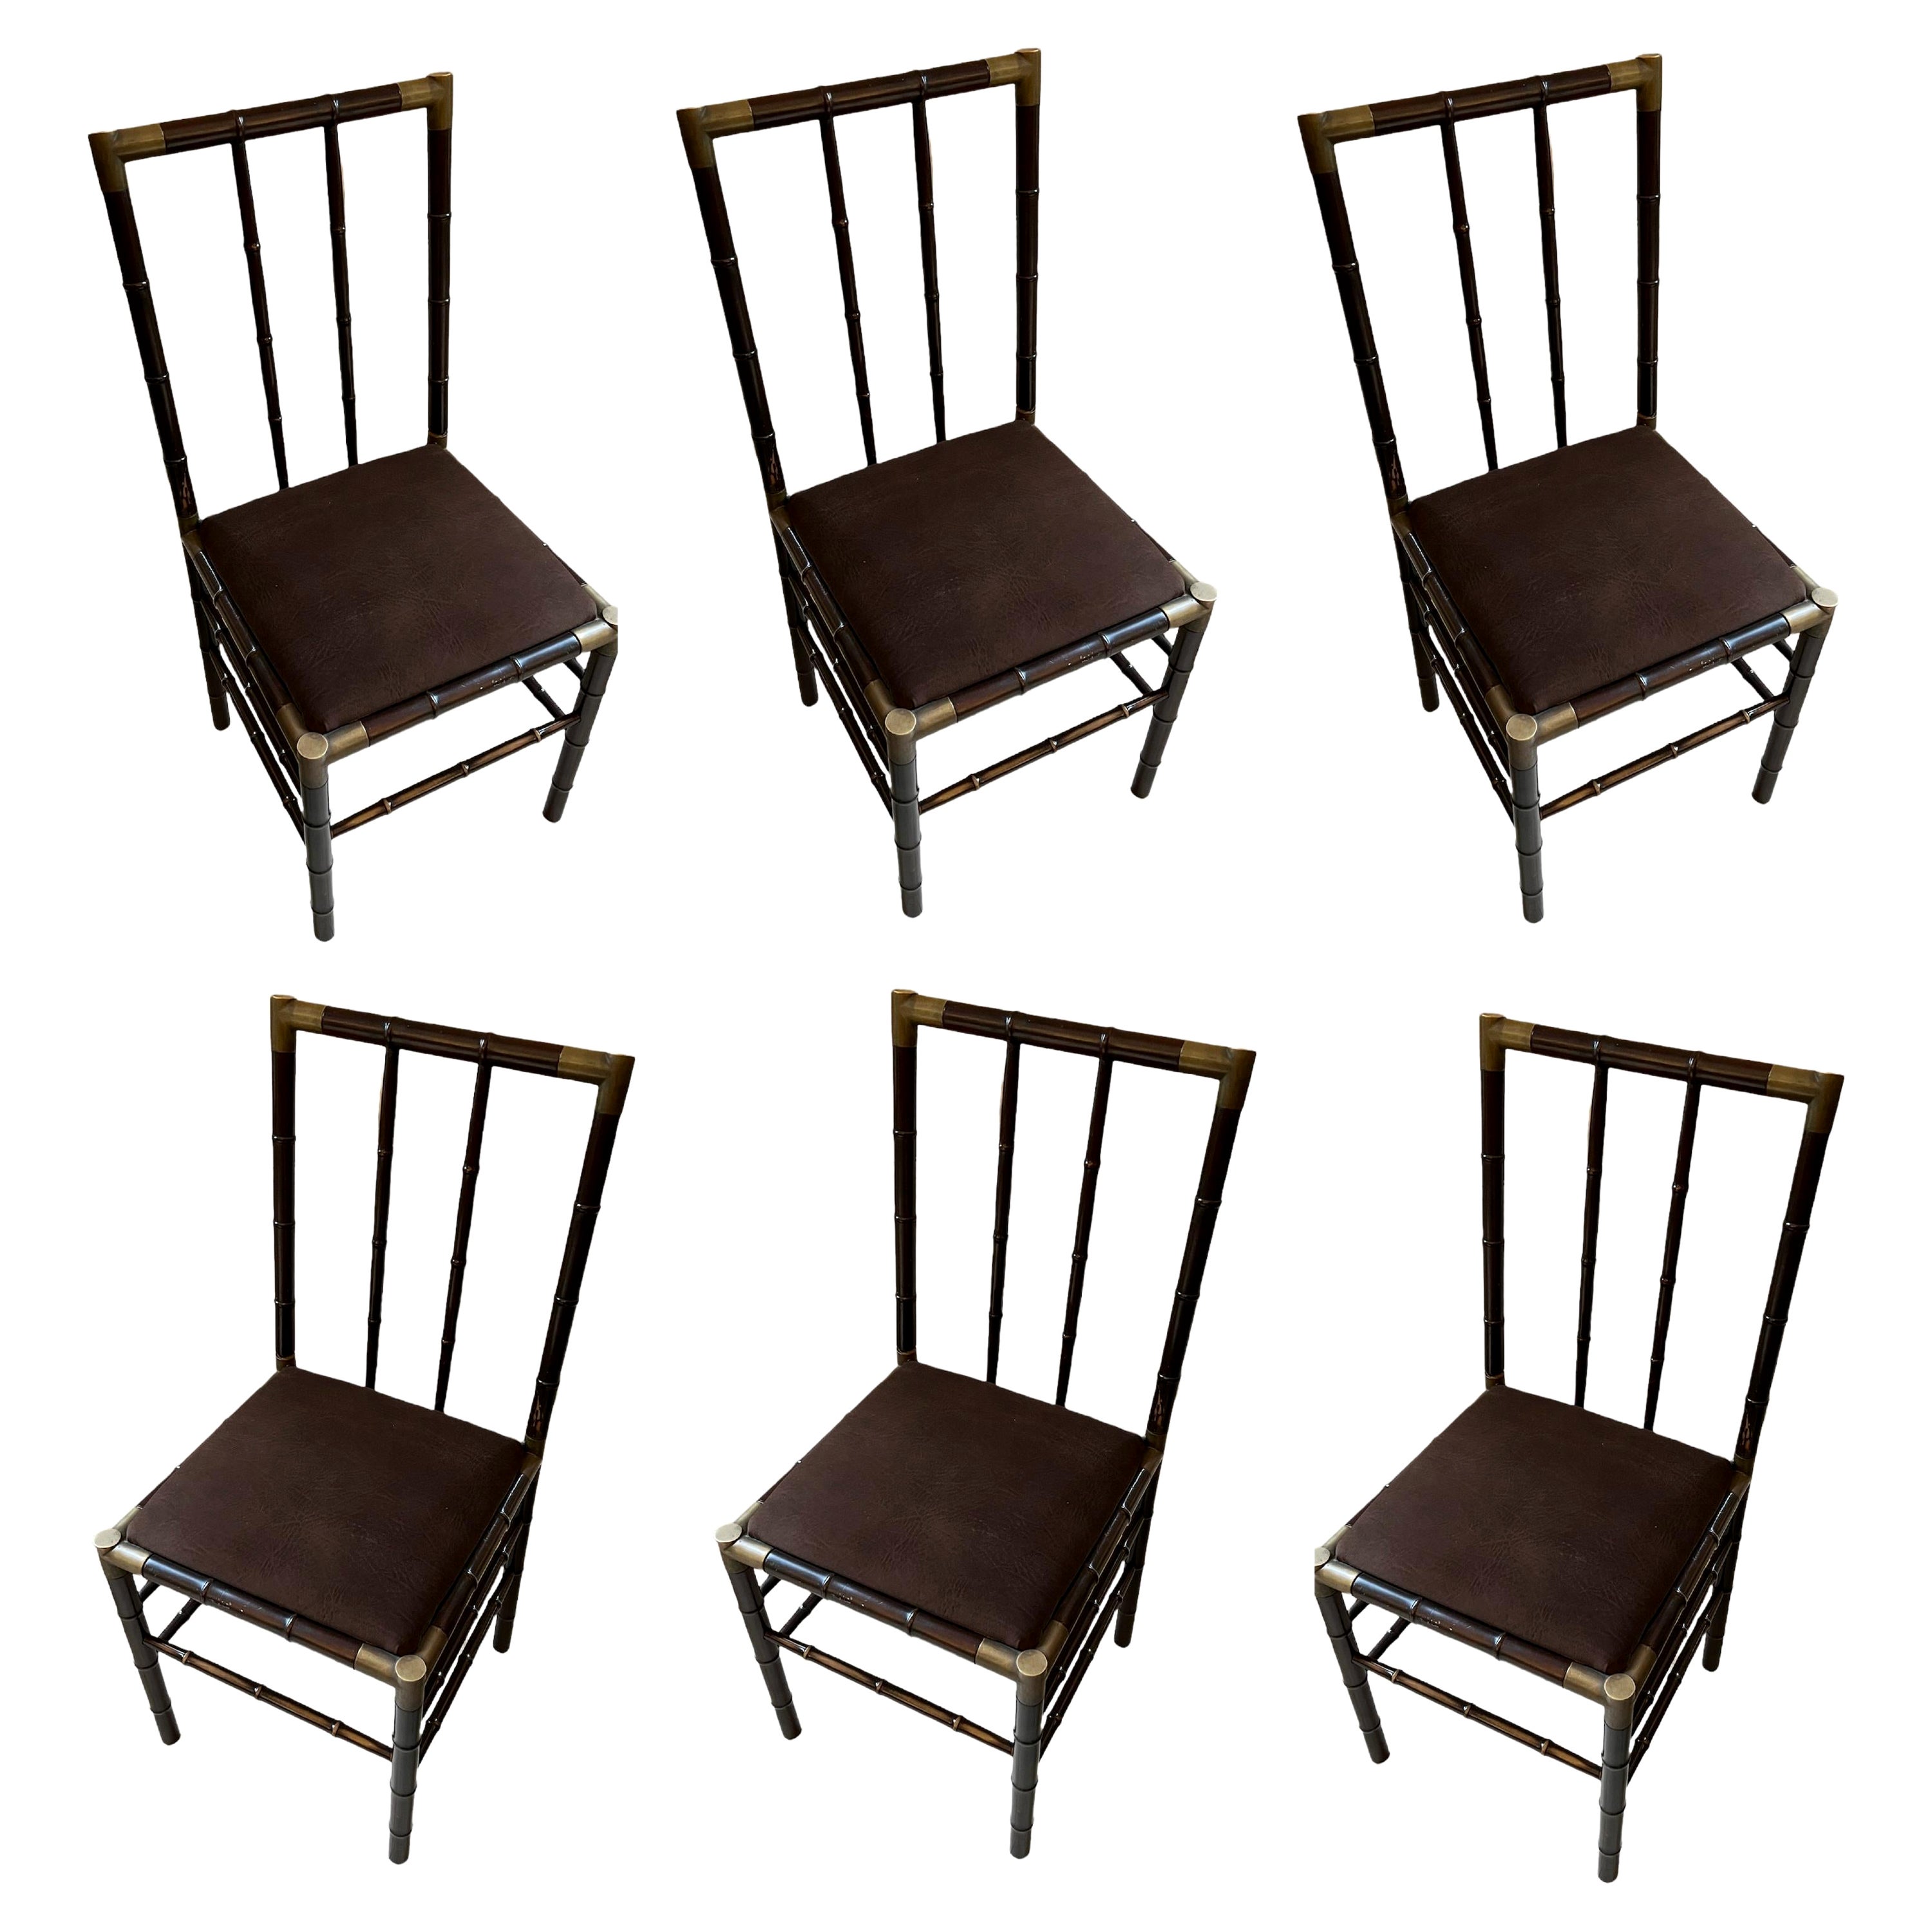 6 Chairs, 1960